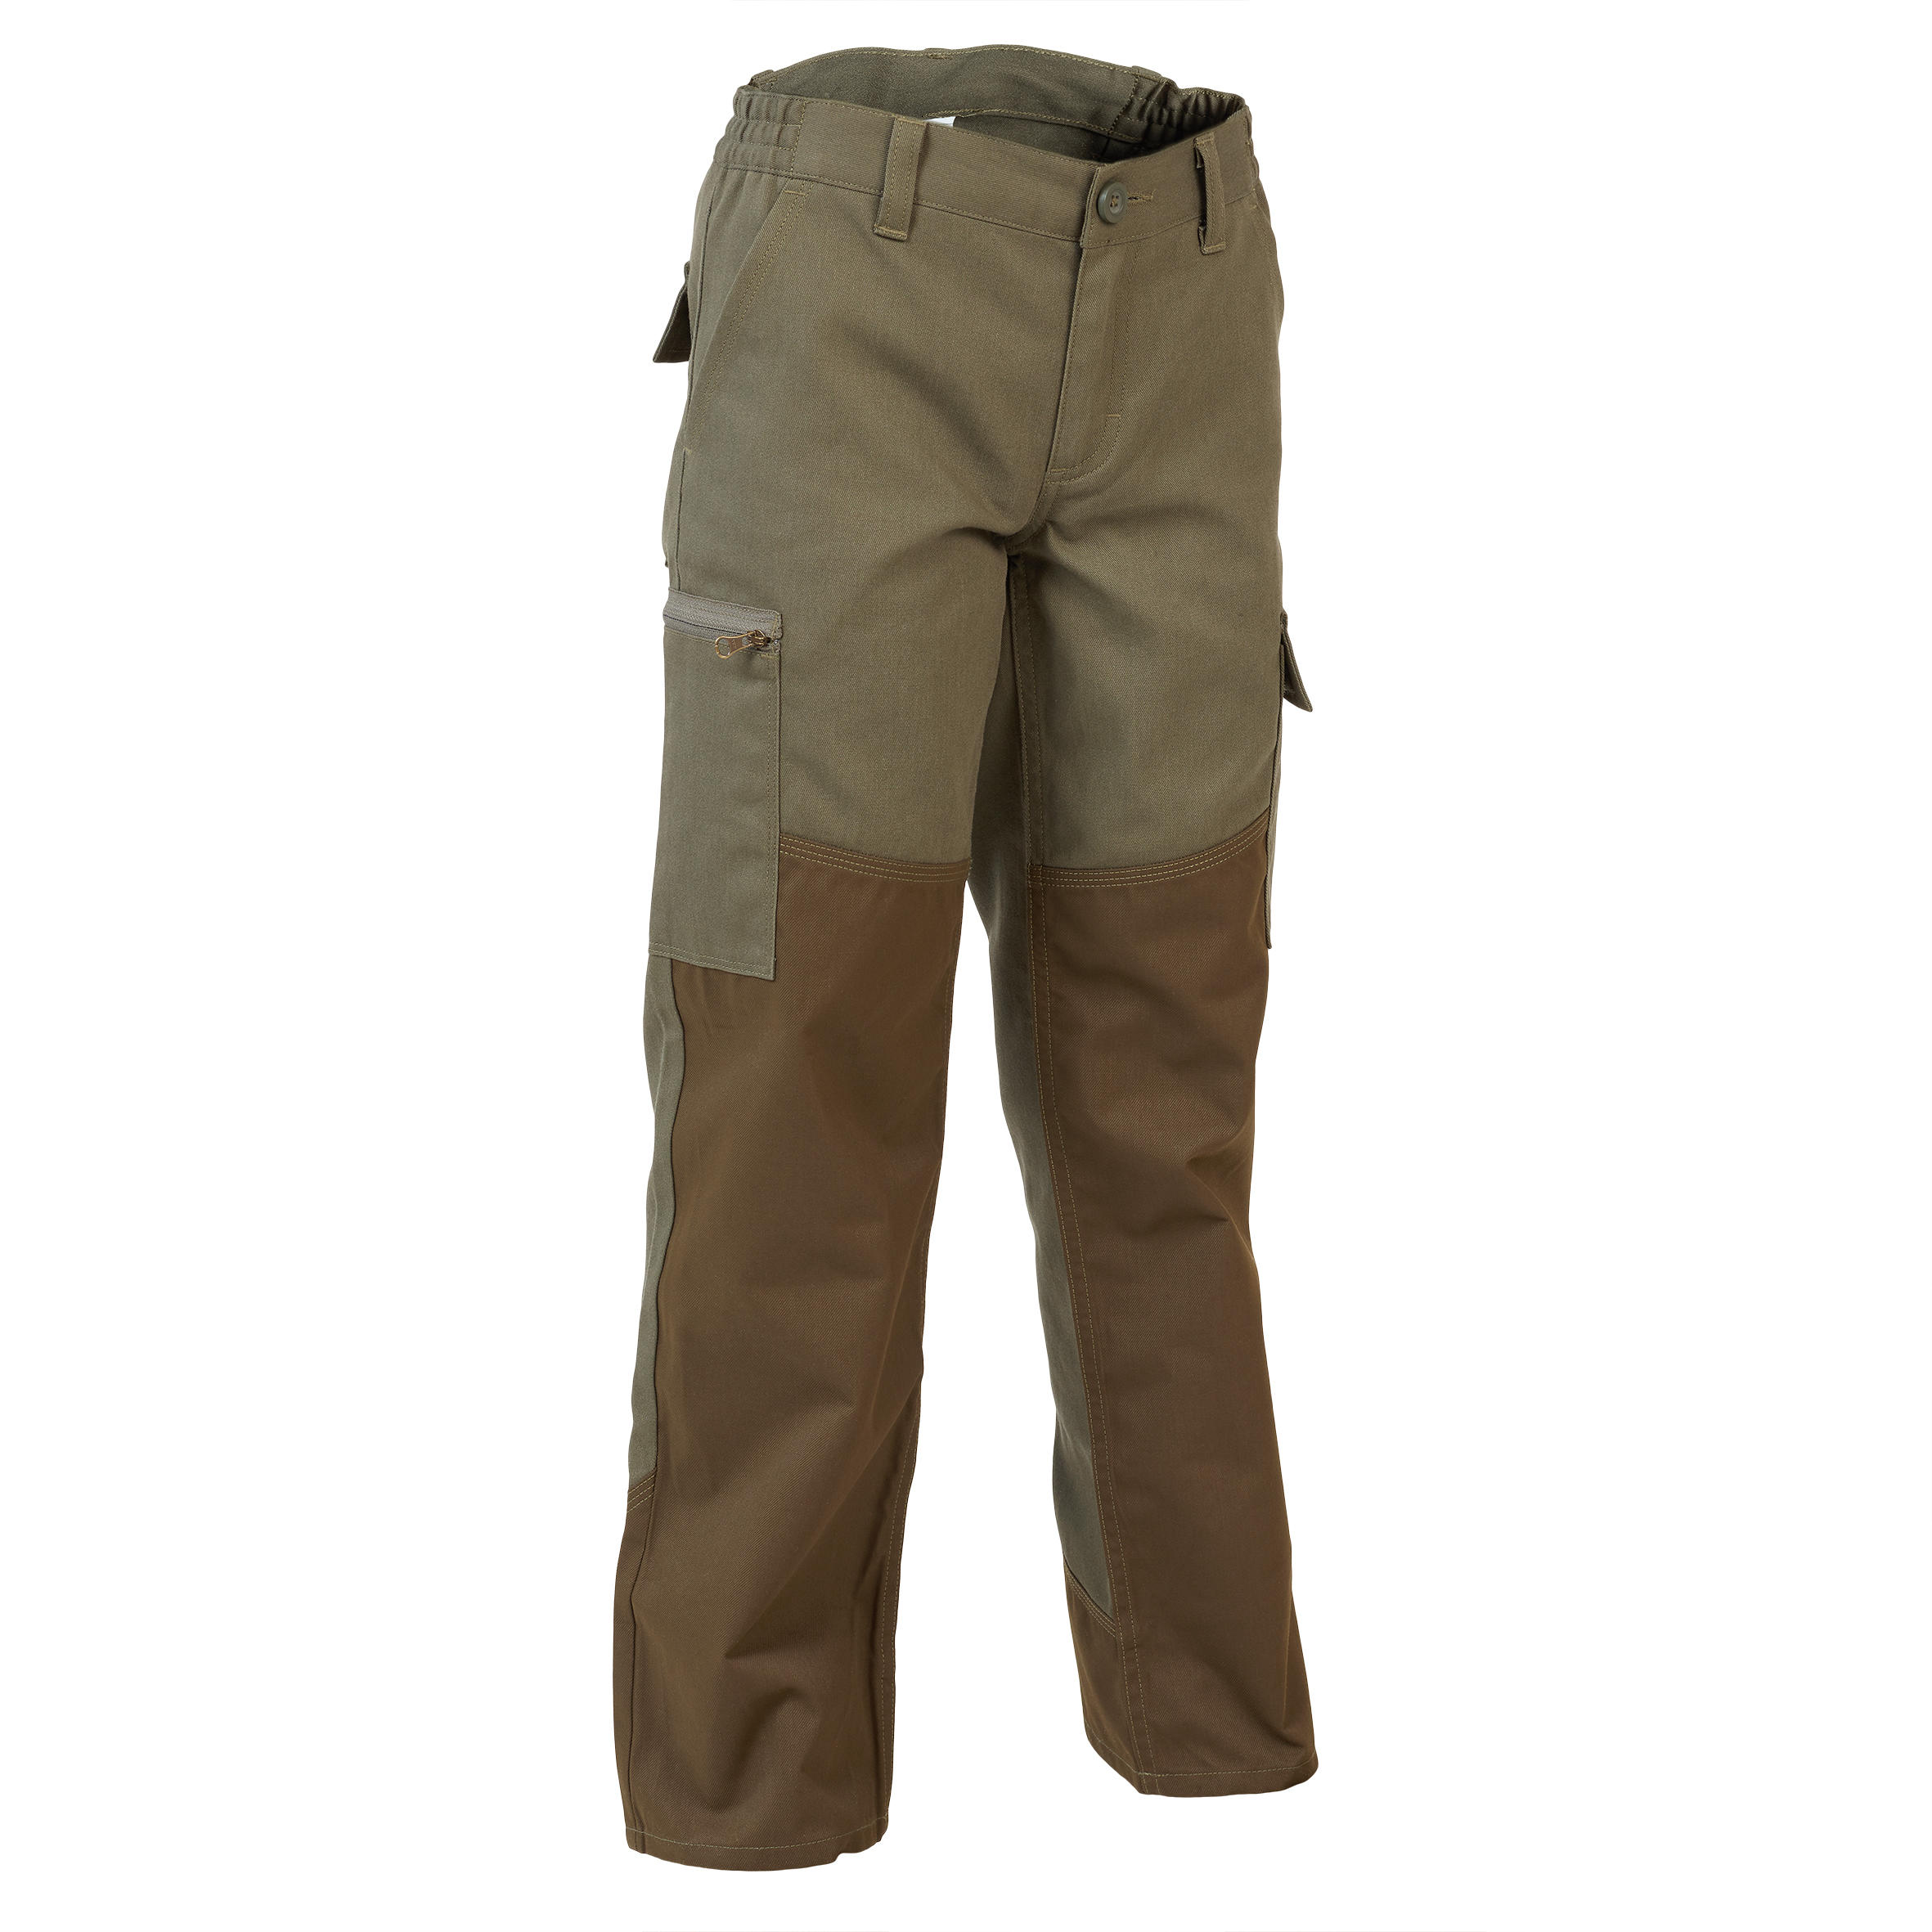 WARM HUNTING TROUSERS CAMOUFLAGE 100 SOLOGNAC | Decathlon